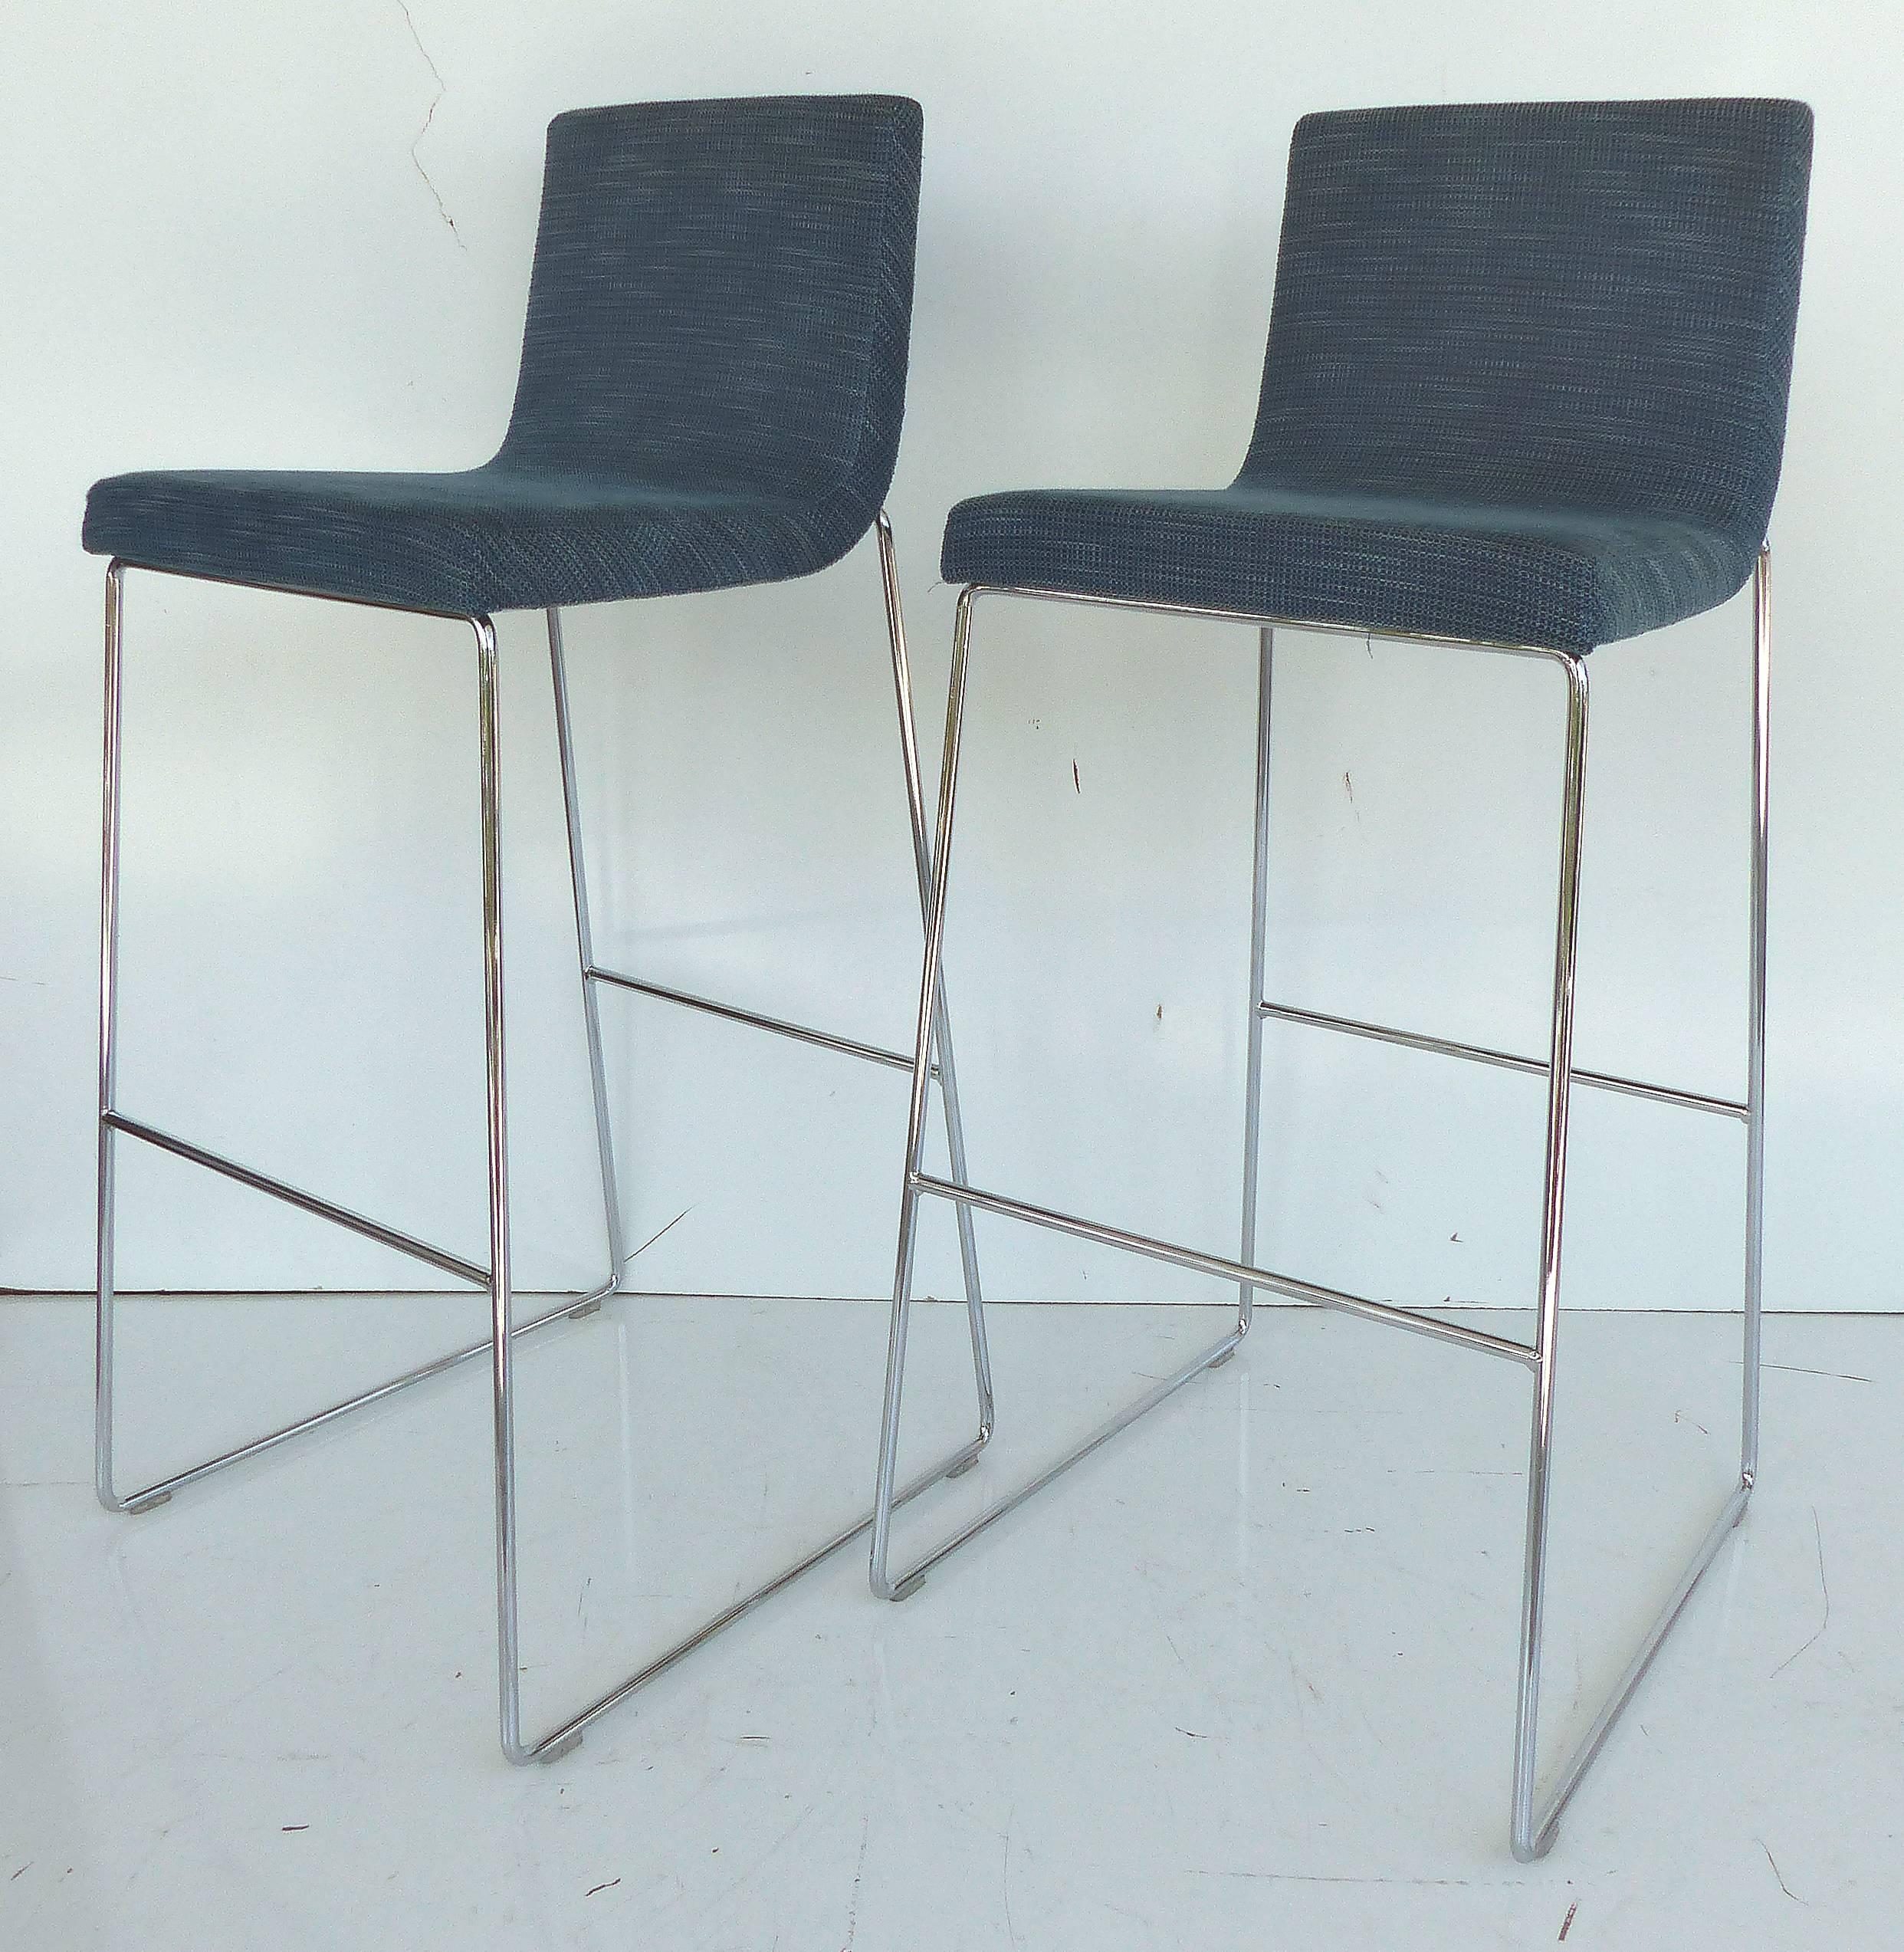 Woven Set of Five Contemporary Upholstered Bar Stools in Stainless Steel, per item